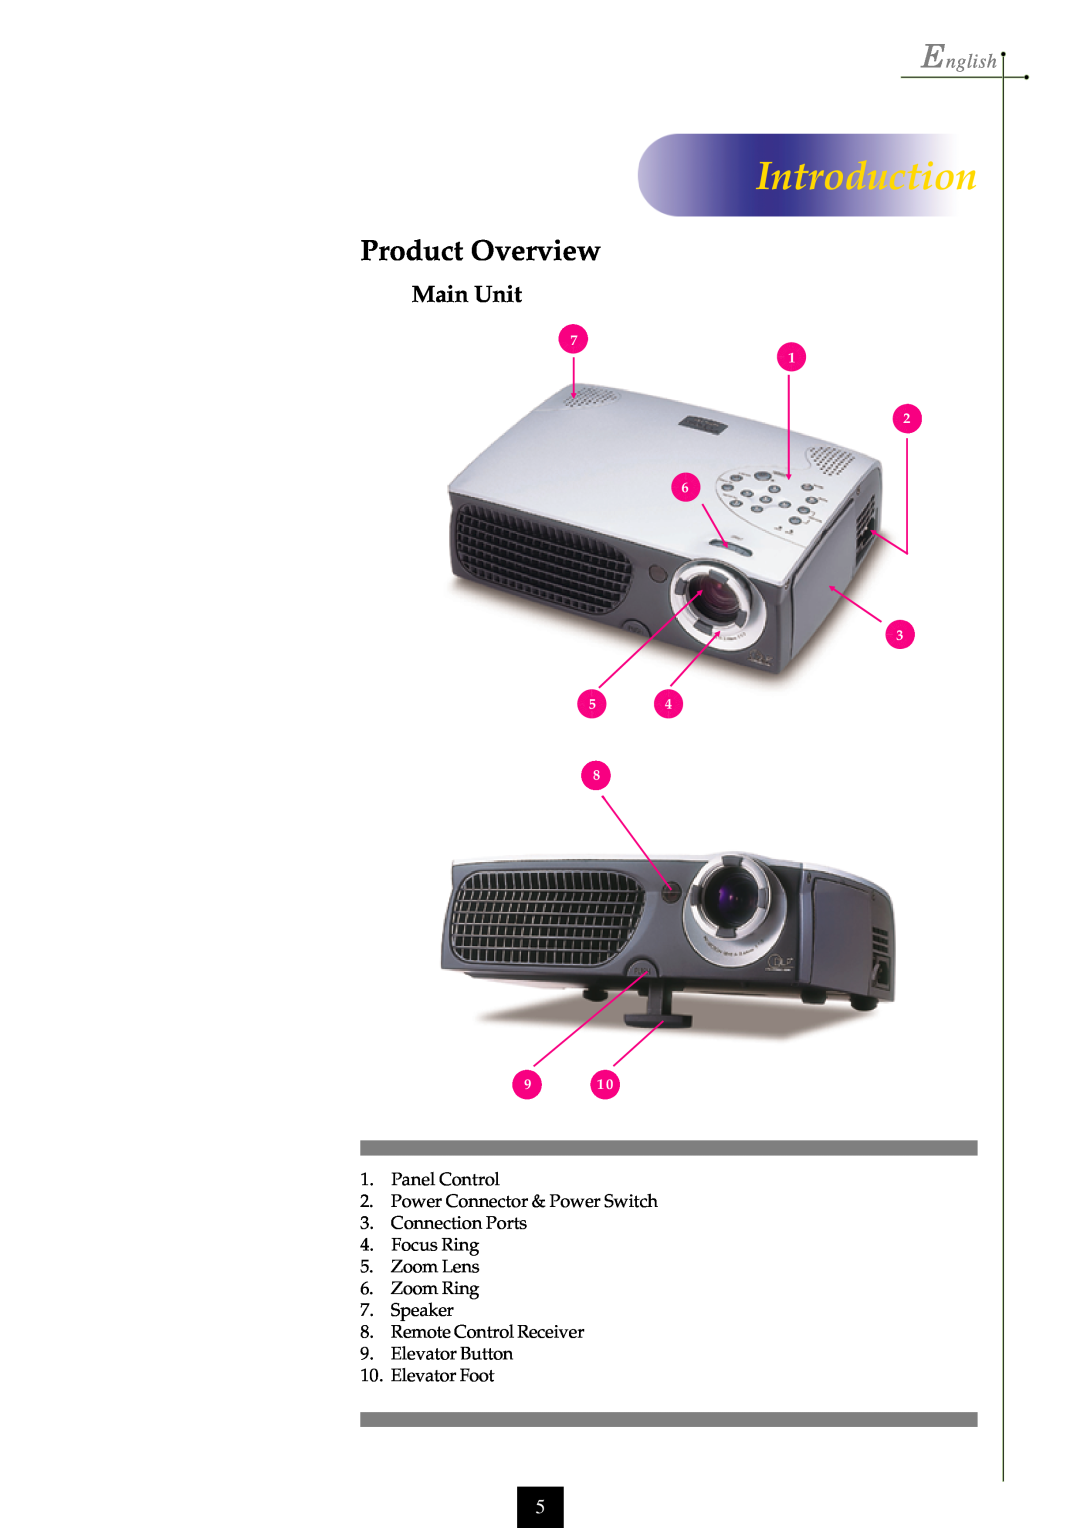 Optoma Technology EP750 specifications Product Overview, Main Unit, Introduction, English 